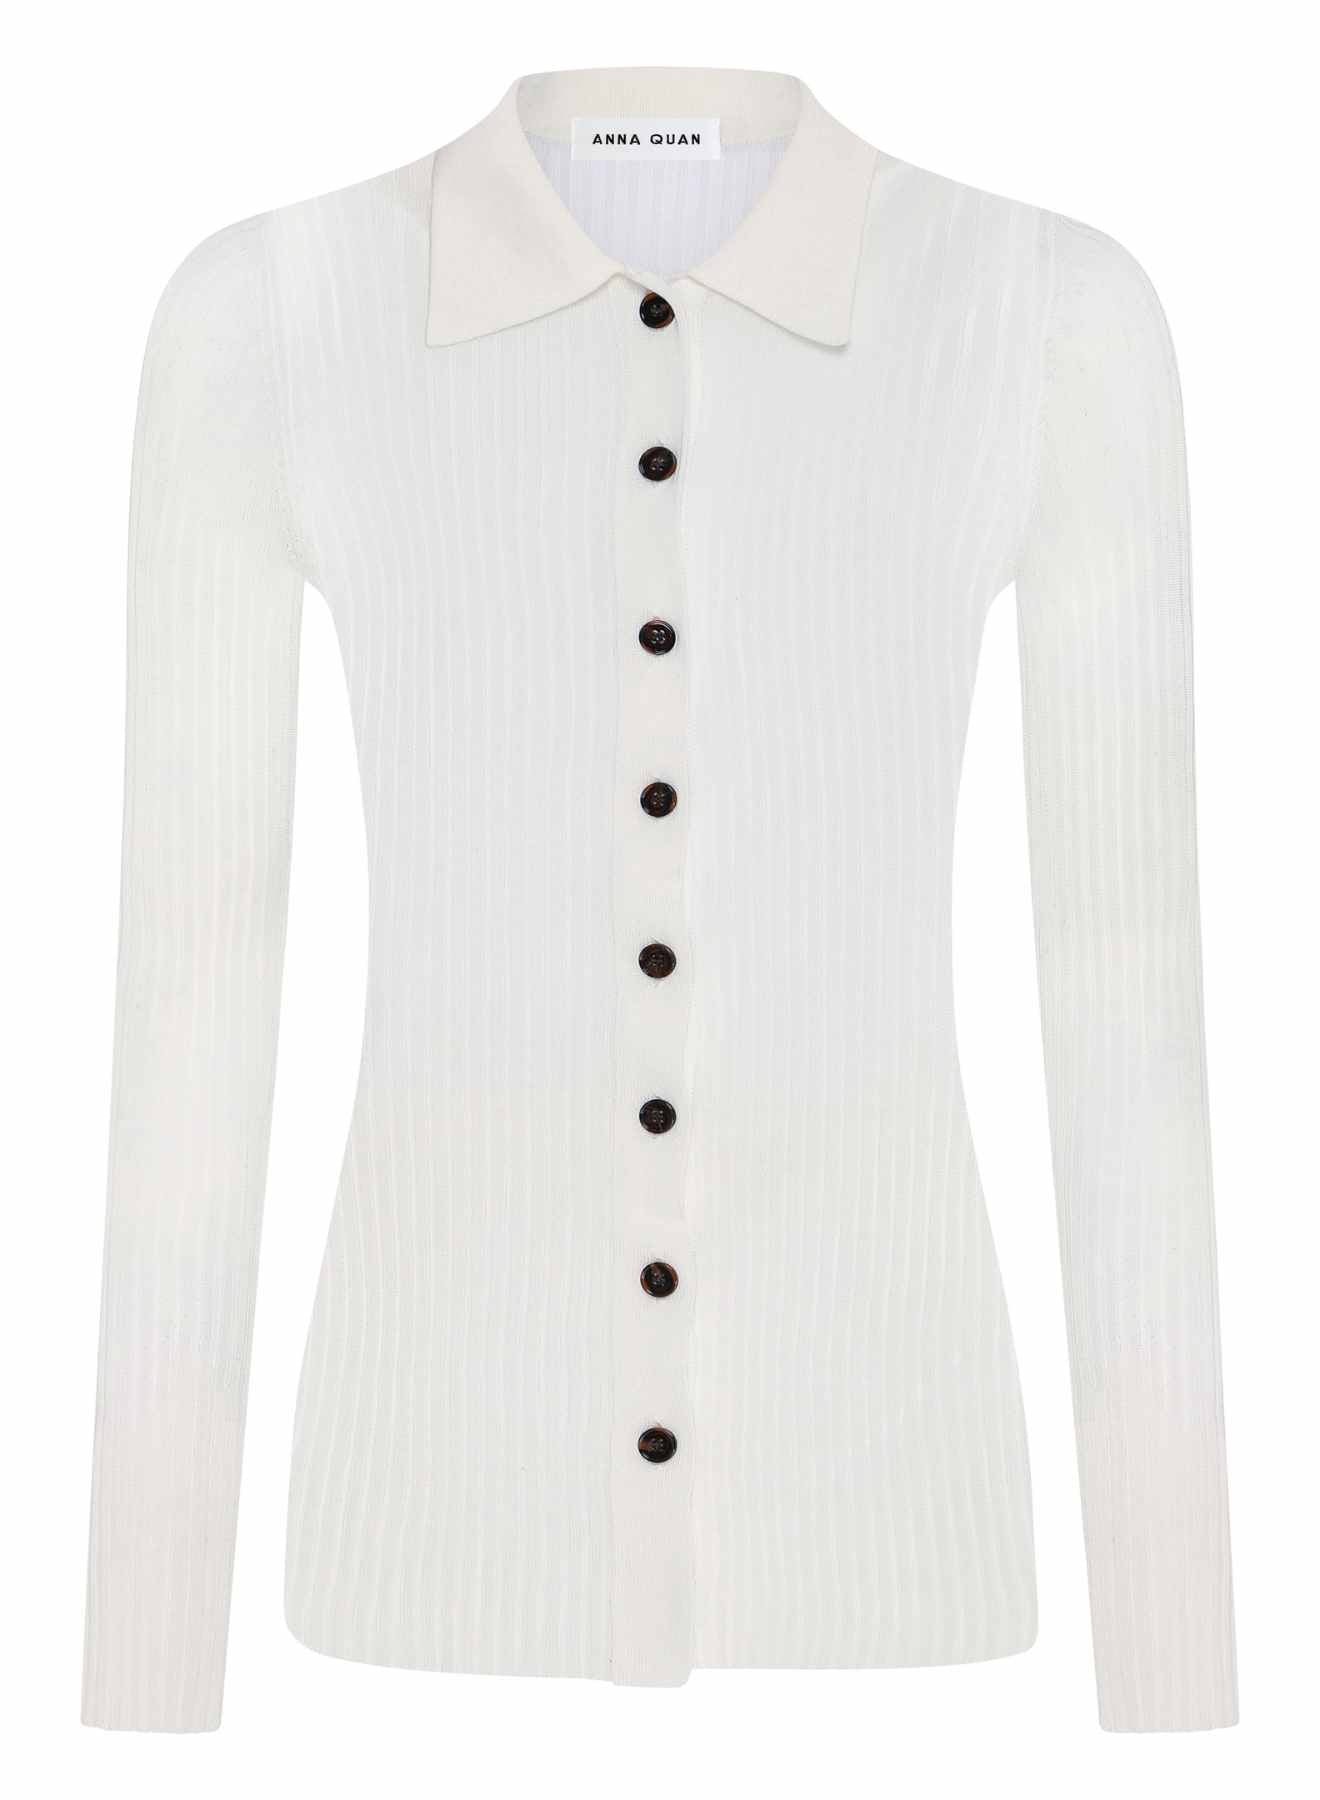 ANNA QUAN'S Sheer Long Sleeve Knit Top, a versatile addition to any knitwear collection. Adorned with mother-of-pearl buttons, this top is perfect for both casual and workwear occasions. Sheer knitwear, button down knitwear, button down top, knit top, sheer knit top, longsleeve knit top.